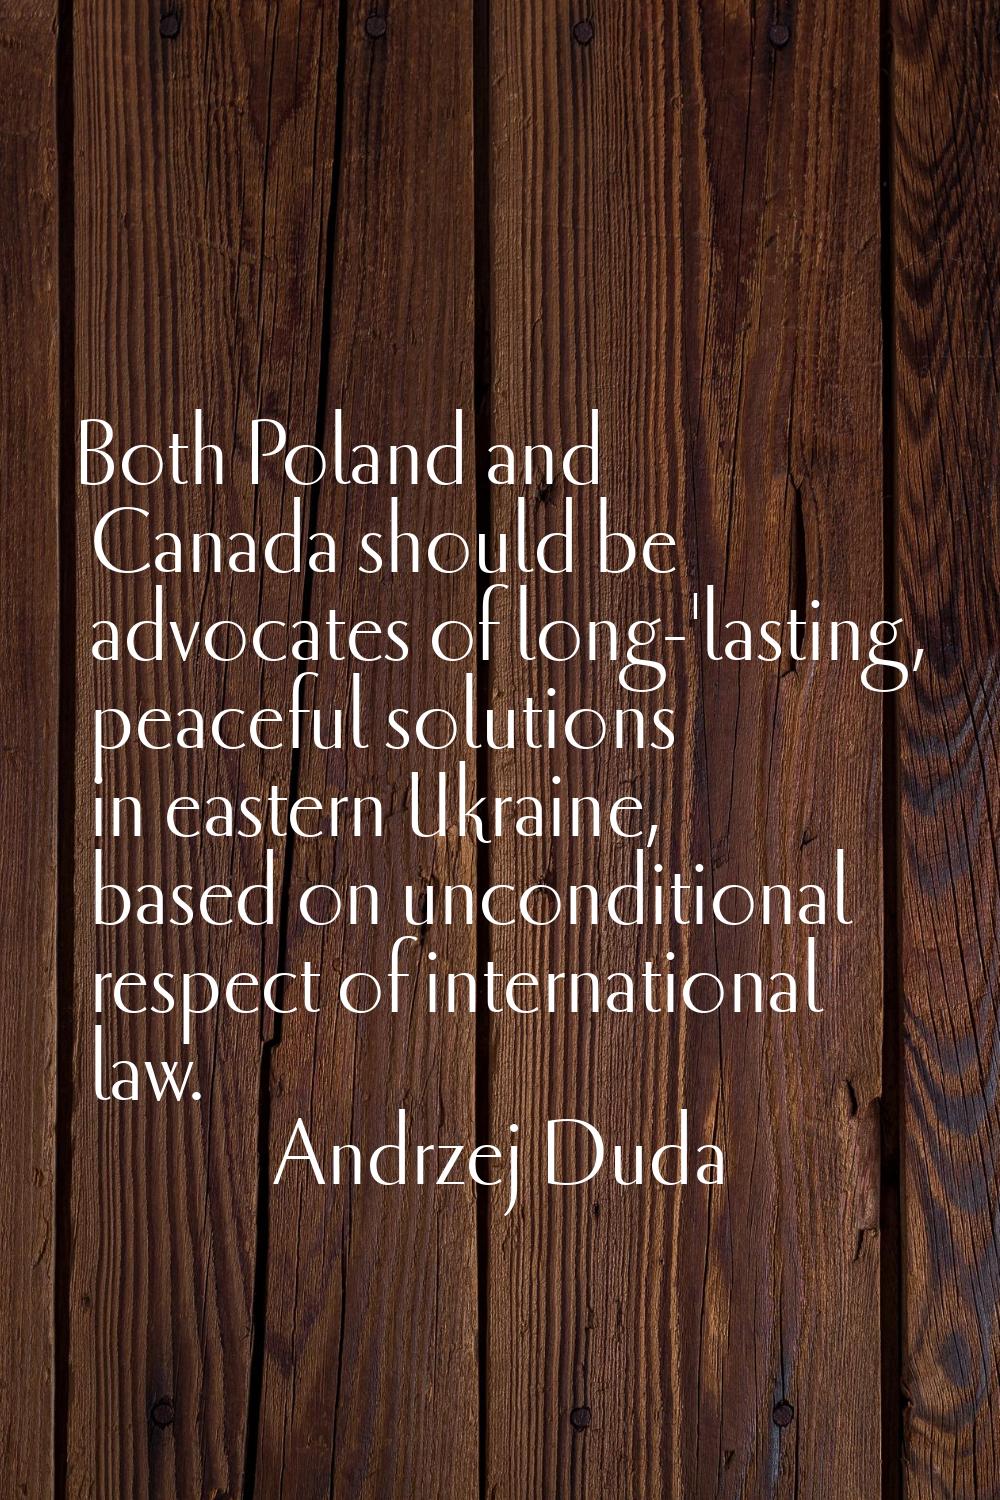 Both Poland and Canada should be advocates of long-'lasting, peaceful solutions in eastern Ukraine,